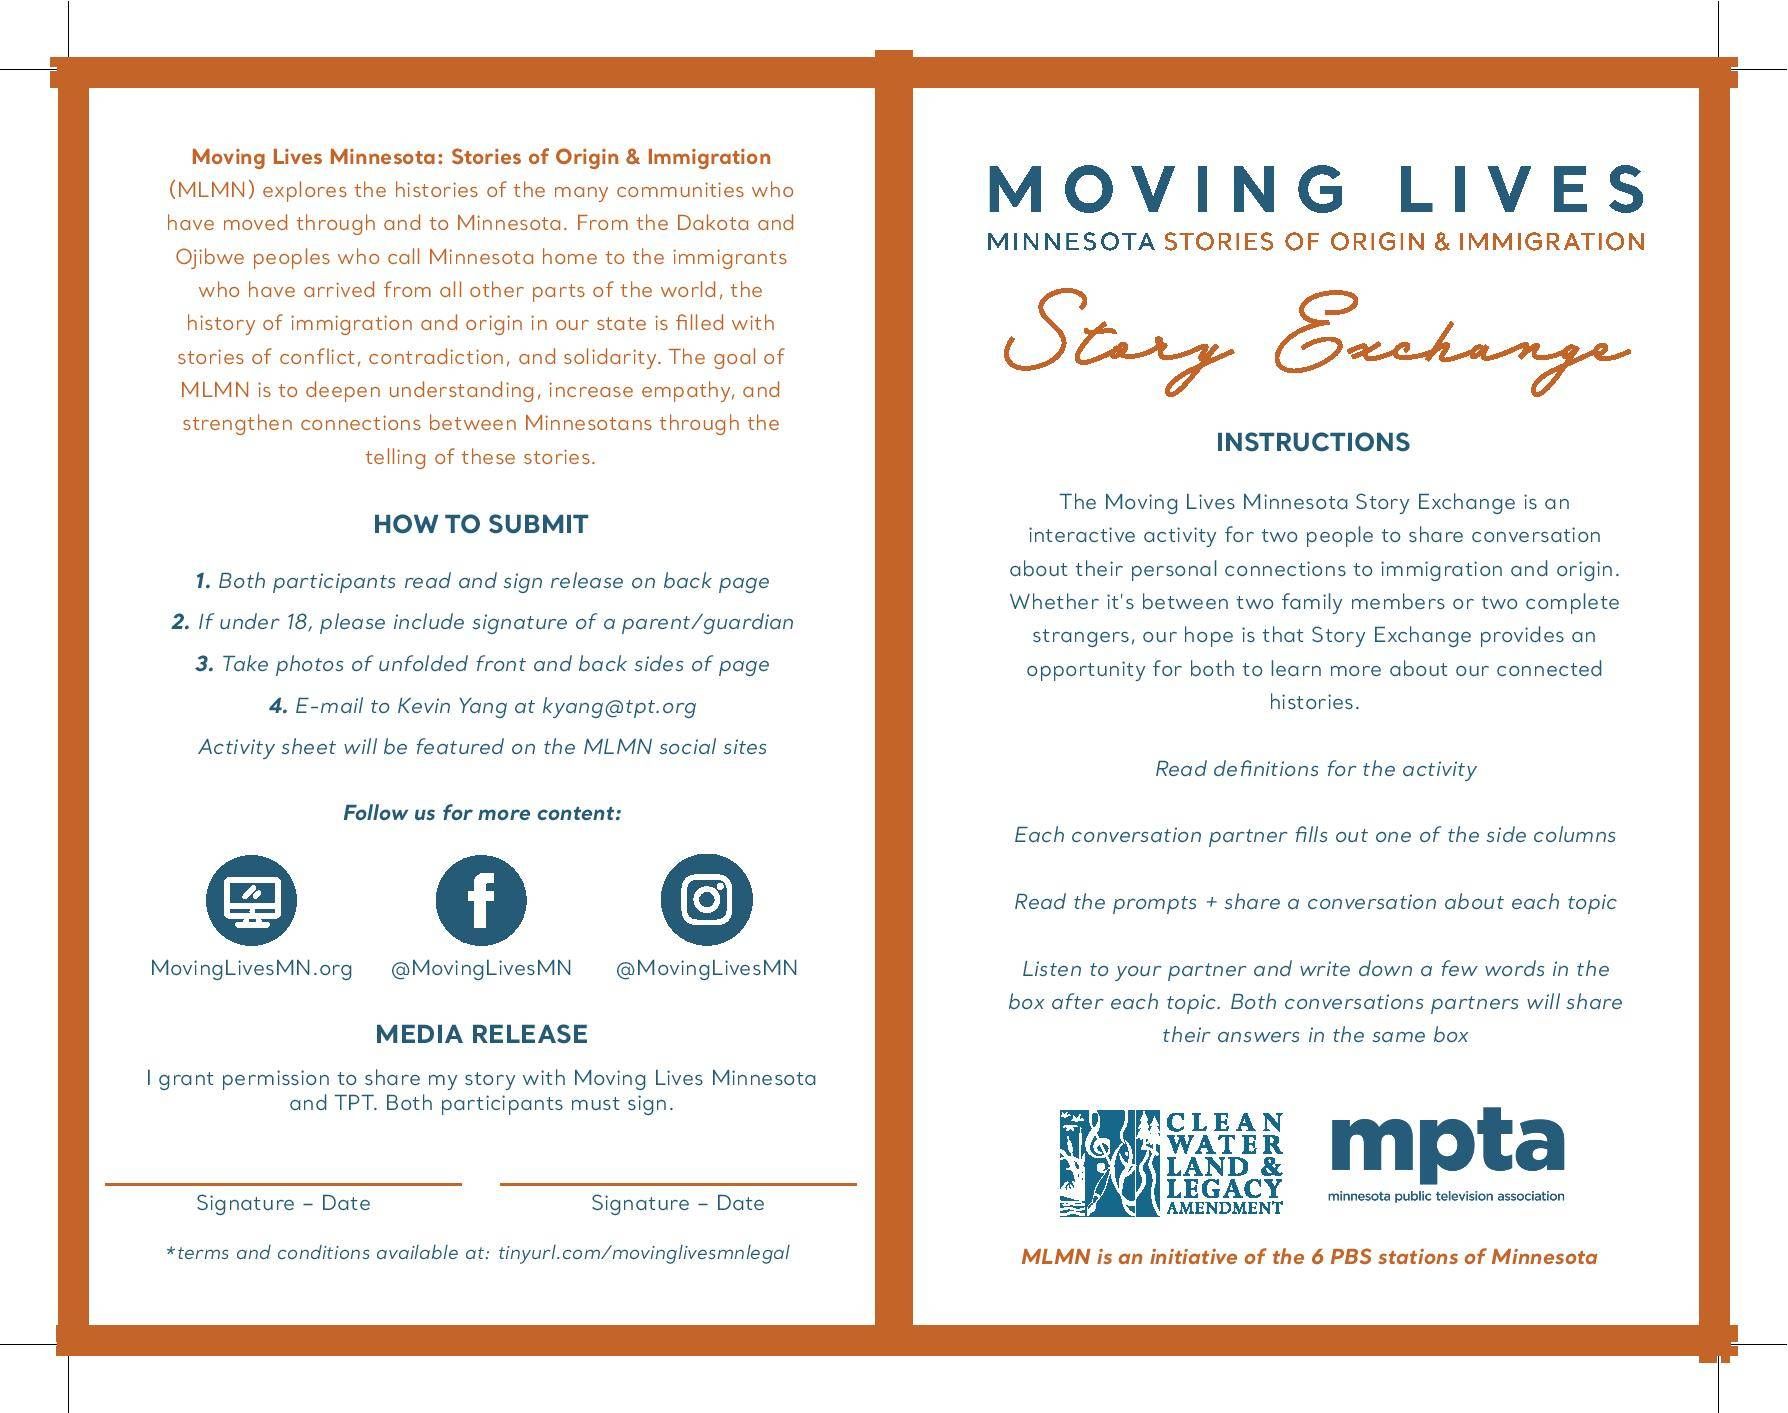 A pamphlet describing the Story Exchange project with instructions on how to submit